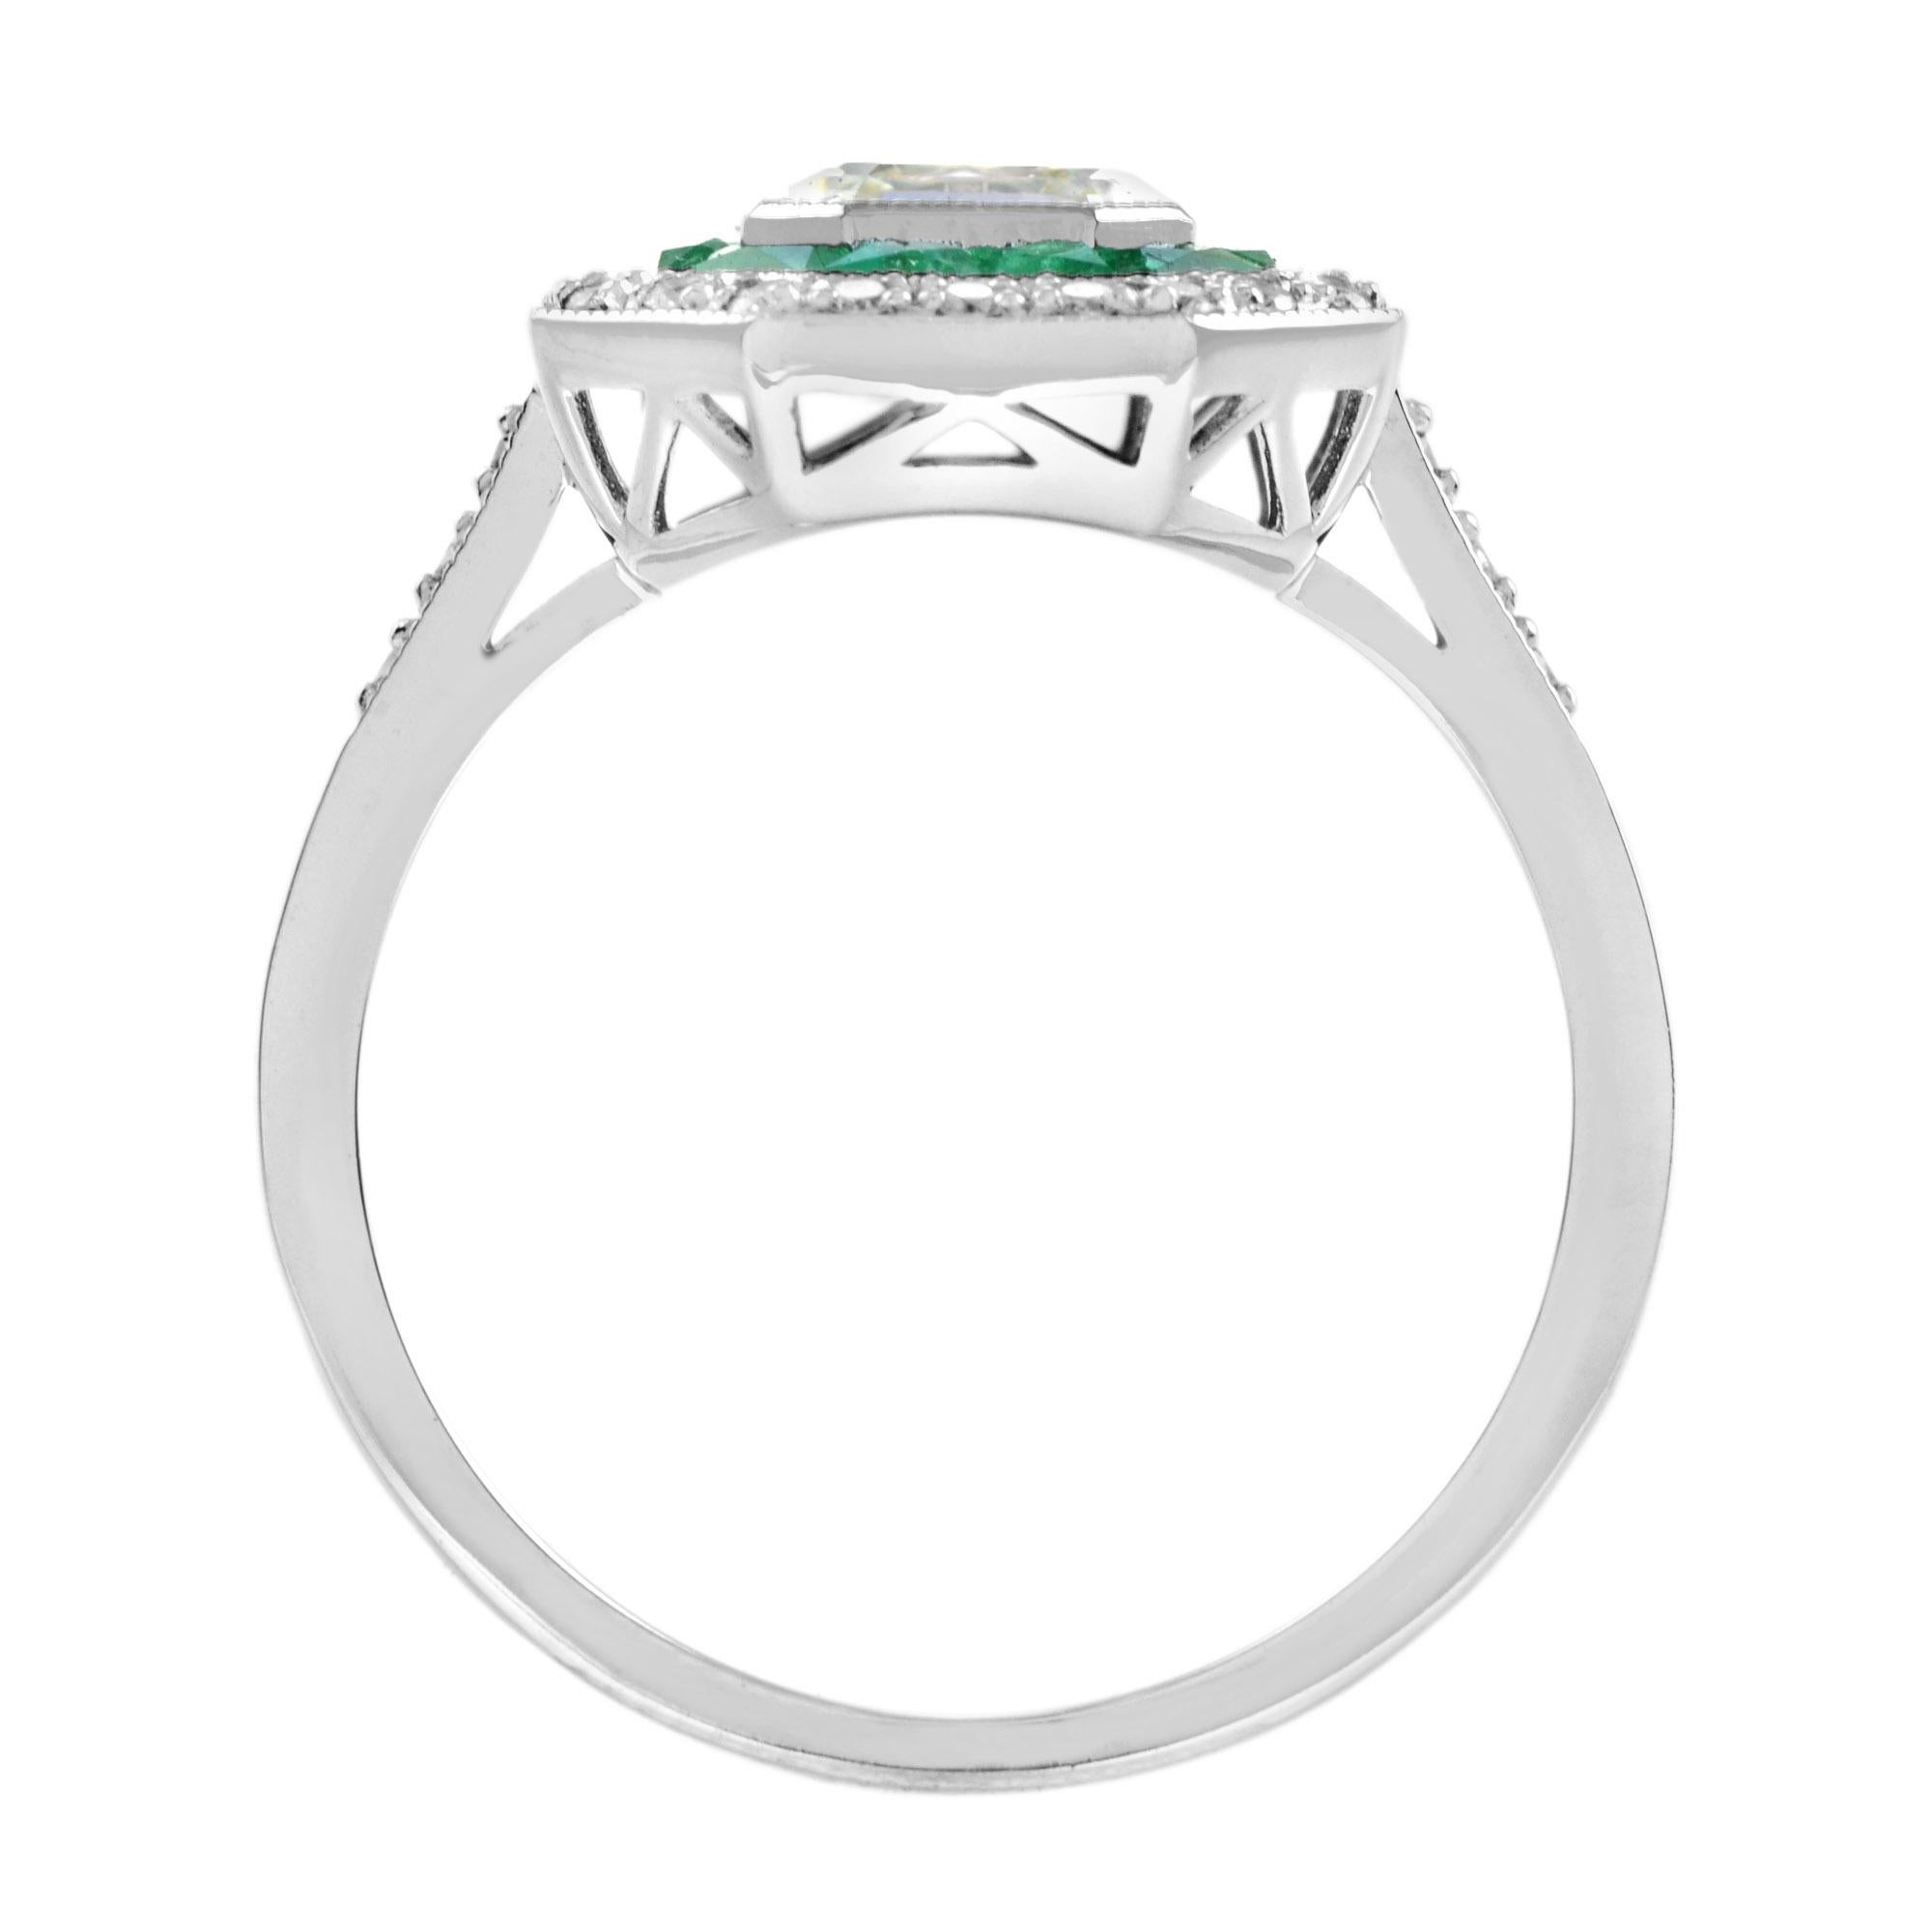 Art Deco Style Asscher Cut Diamond and Emerald Engagement Ring in 18K White Gold For Sale 3